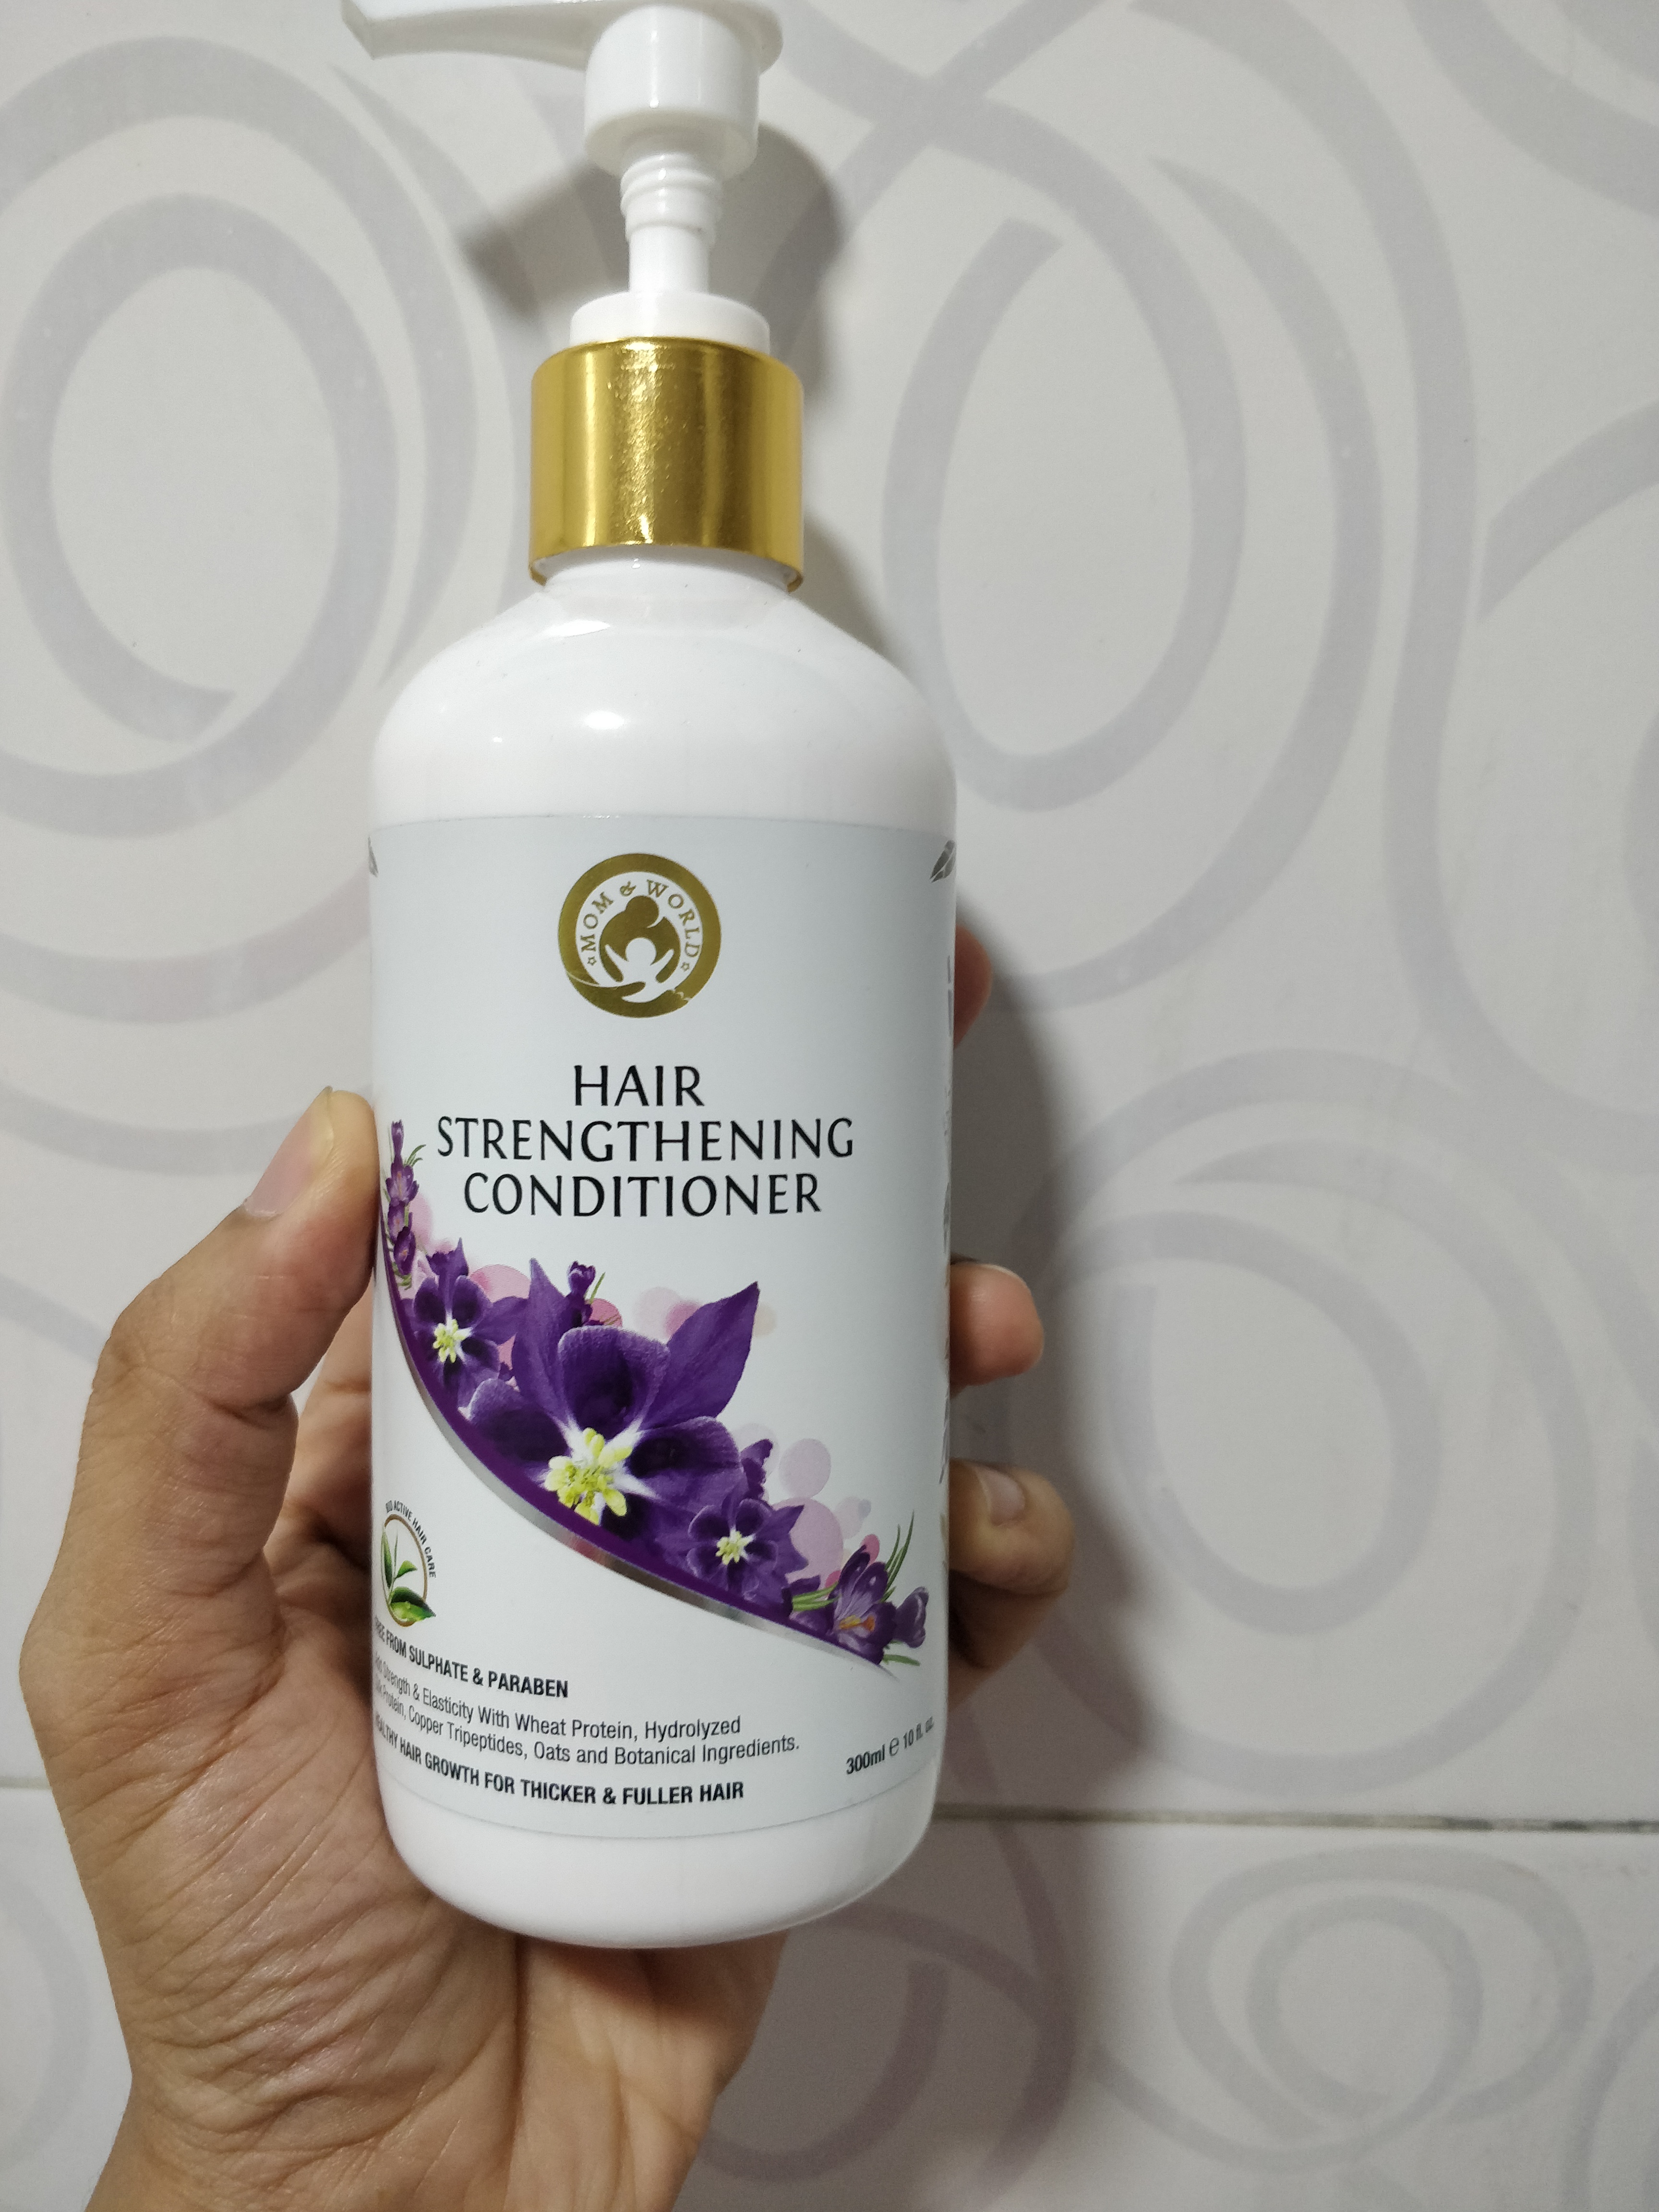 Mom & World Hair Strengthening Shampoo + Hair Strengthening Conditioner-Natural ingredients, no side effects-By khushboomua8